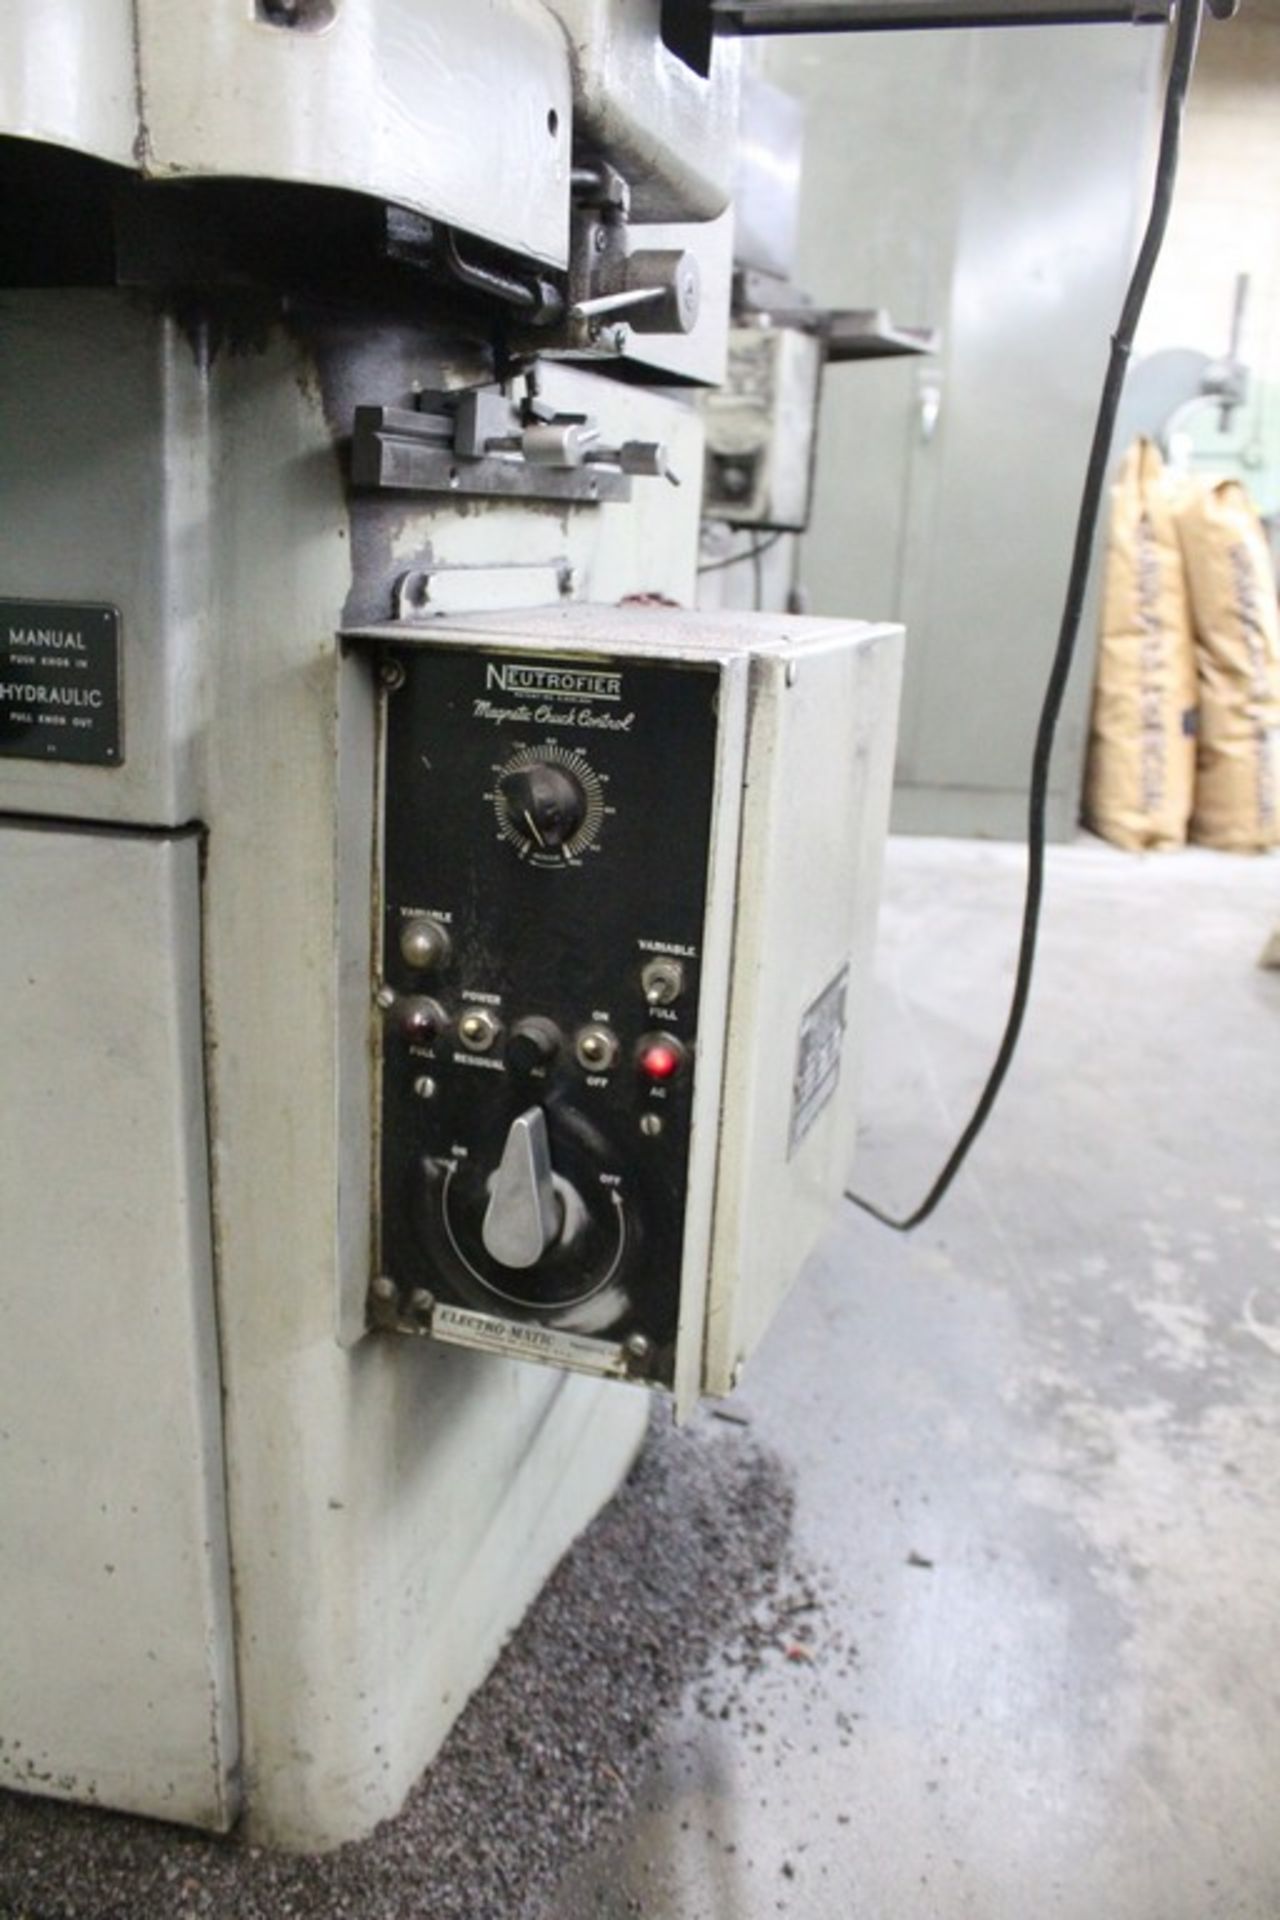 K.O. LEE 6"X18" MODEL S718HG HYDRAULIC SURFACE GRINDER, S/N 11609-1067DA, WITH ELECTRO MAGNETIC - Image 7 of 8